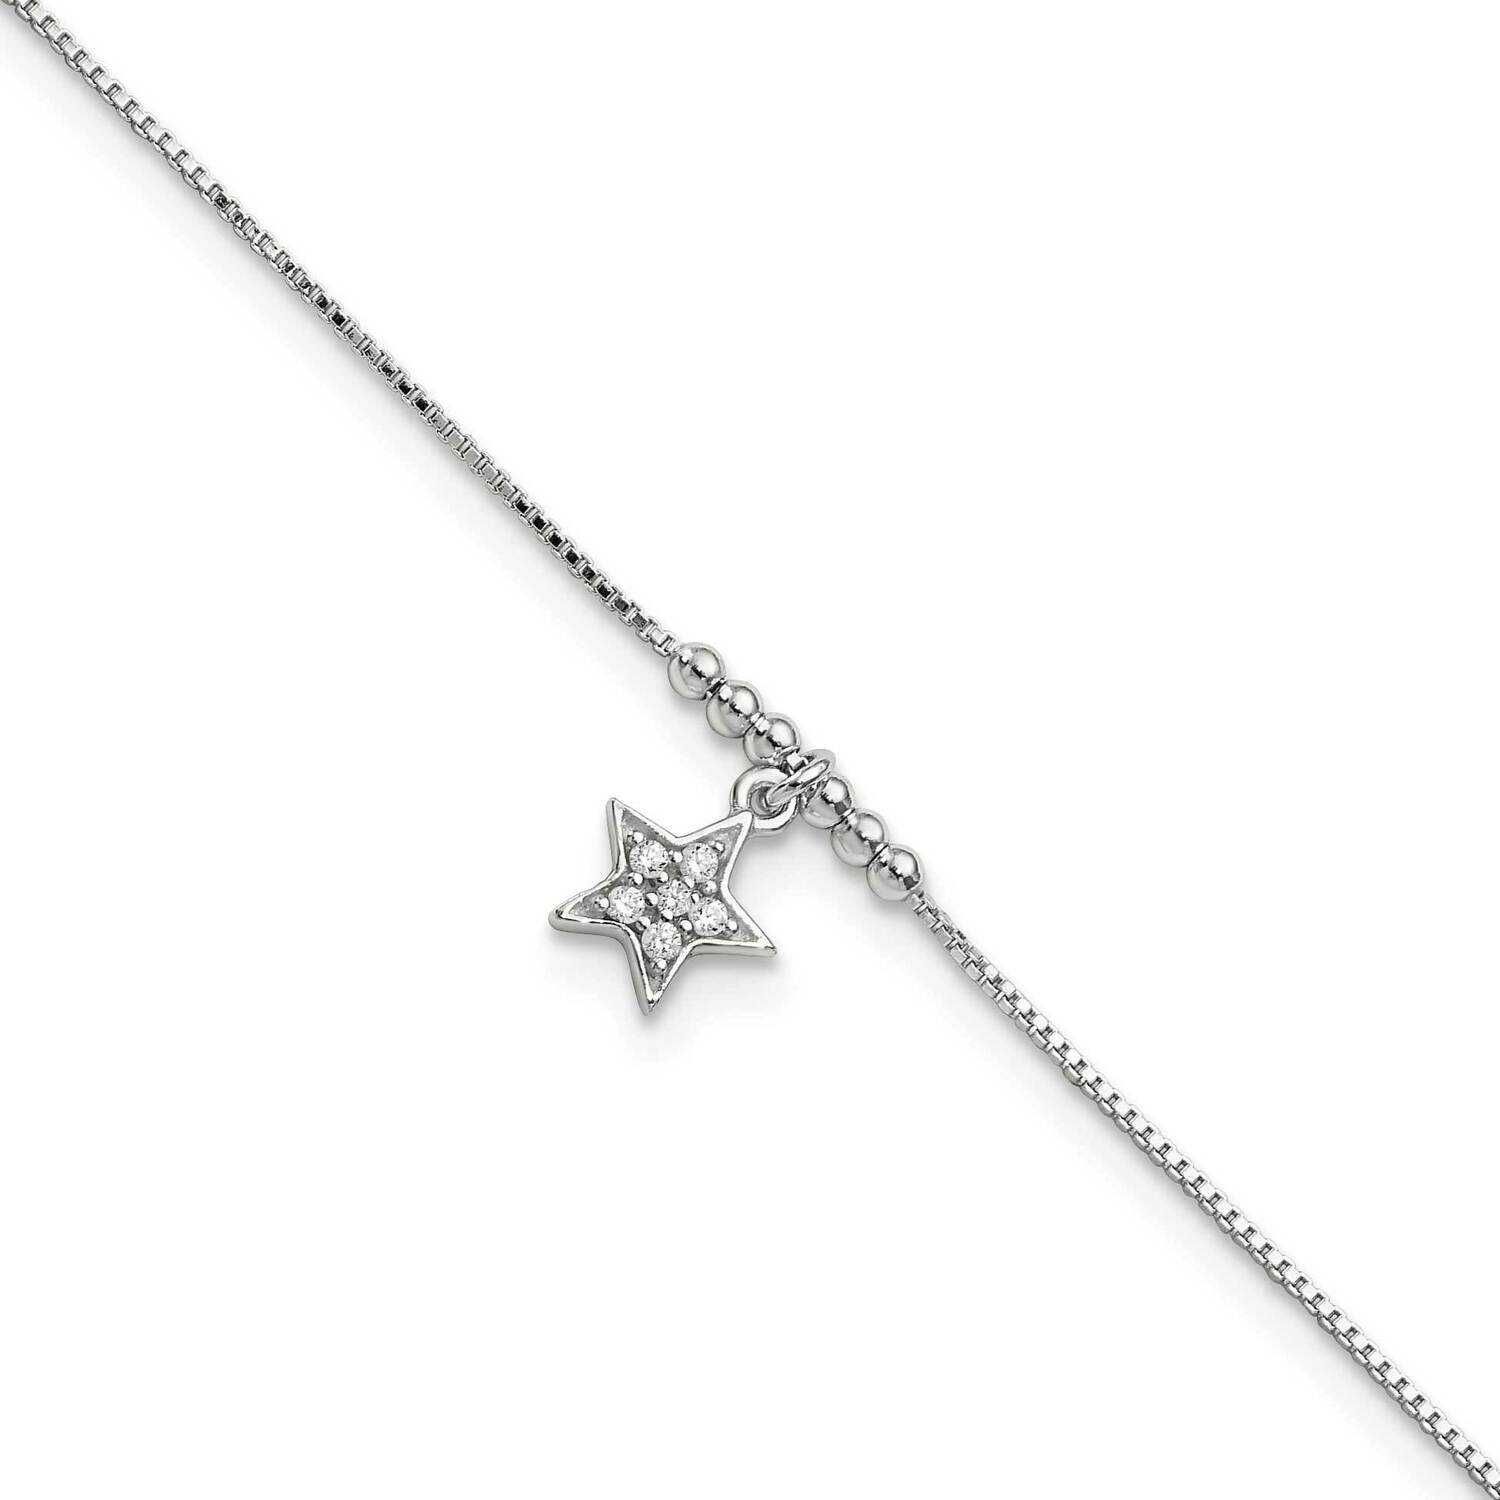 Star and Beads 9 Inch Plus 1 Inch Extender Anklet Sterling Silver Cz Diamond QG5754-9